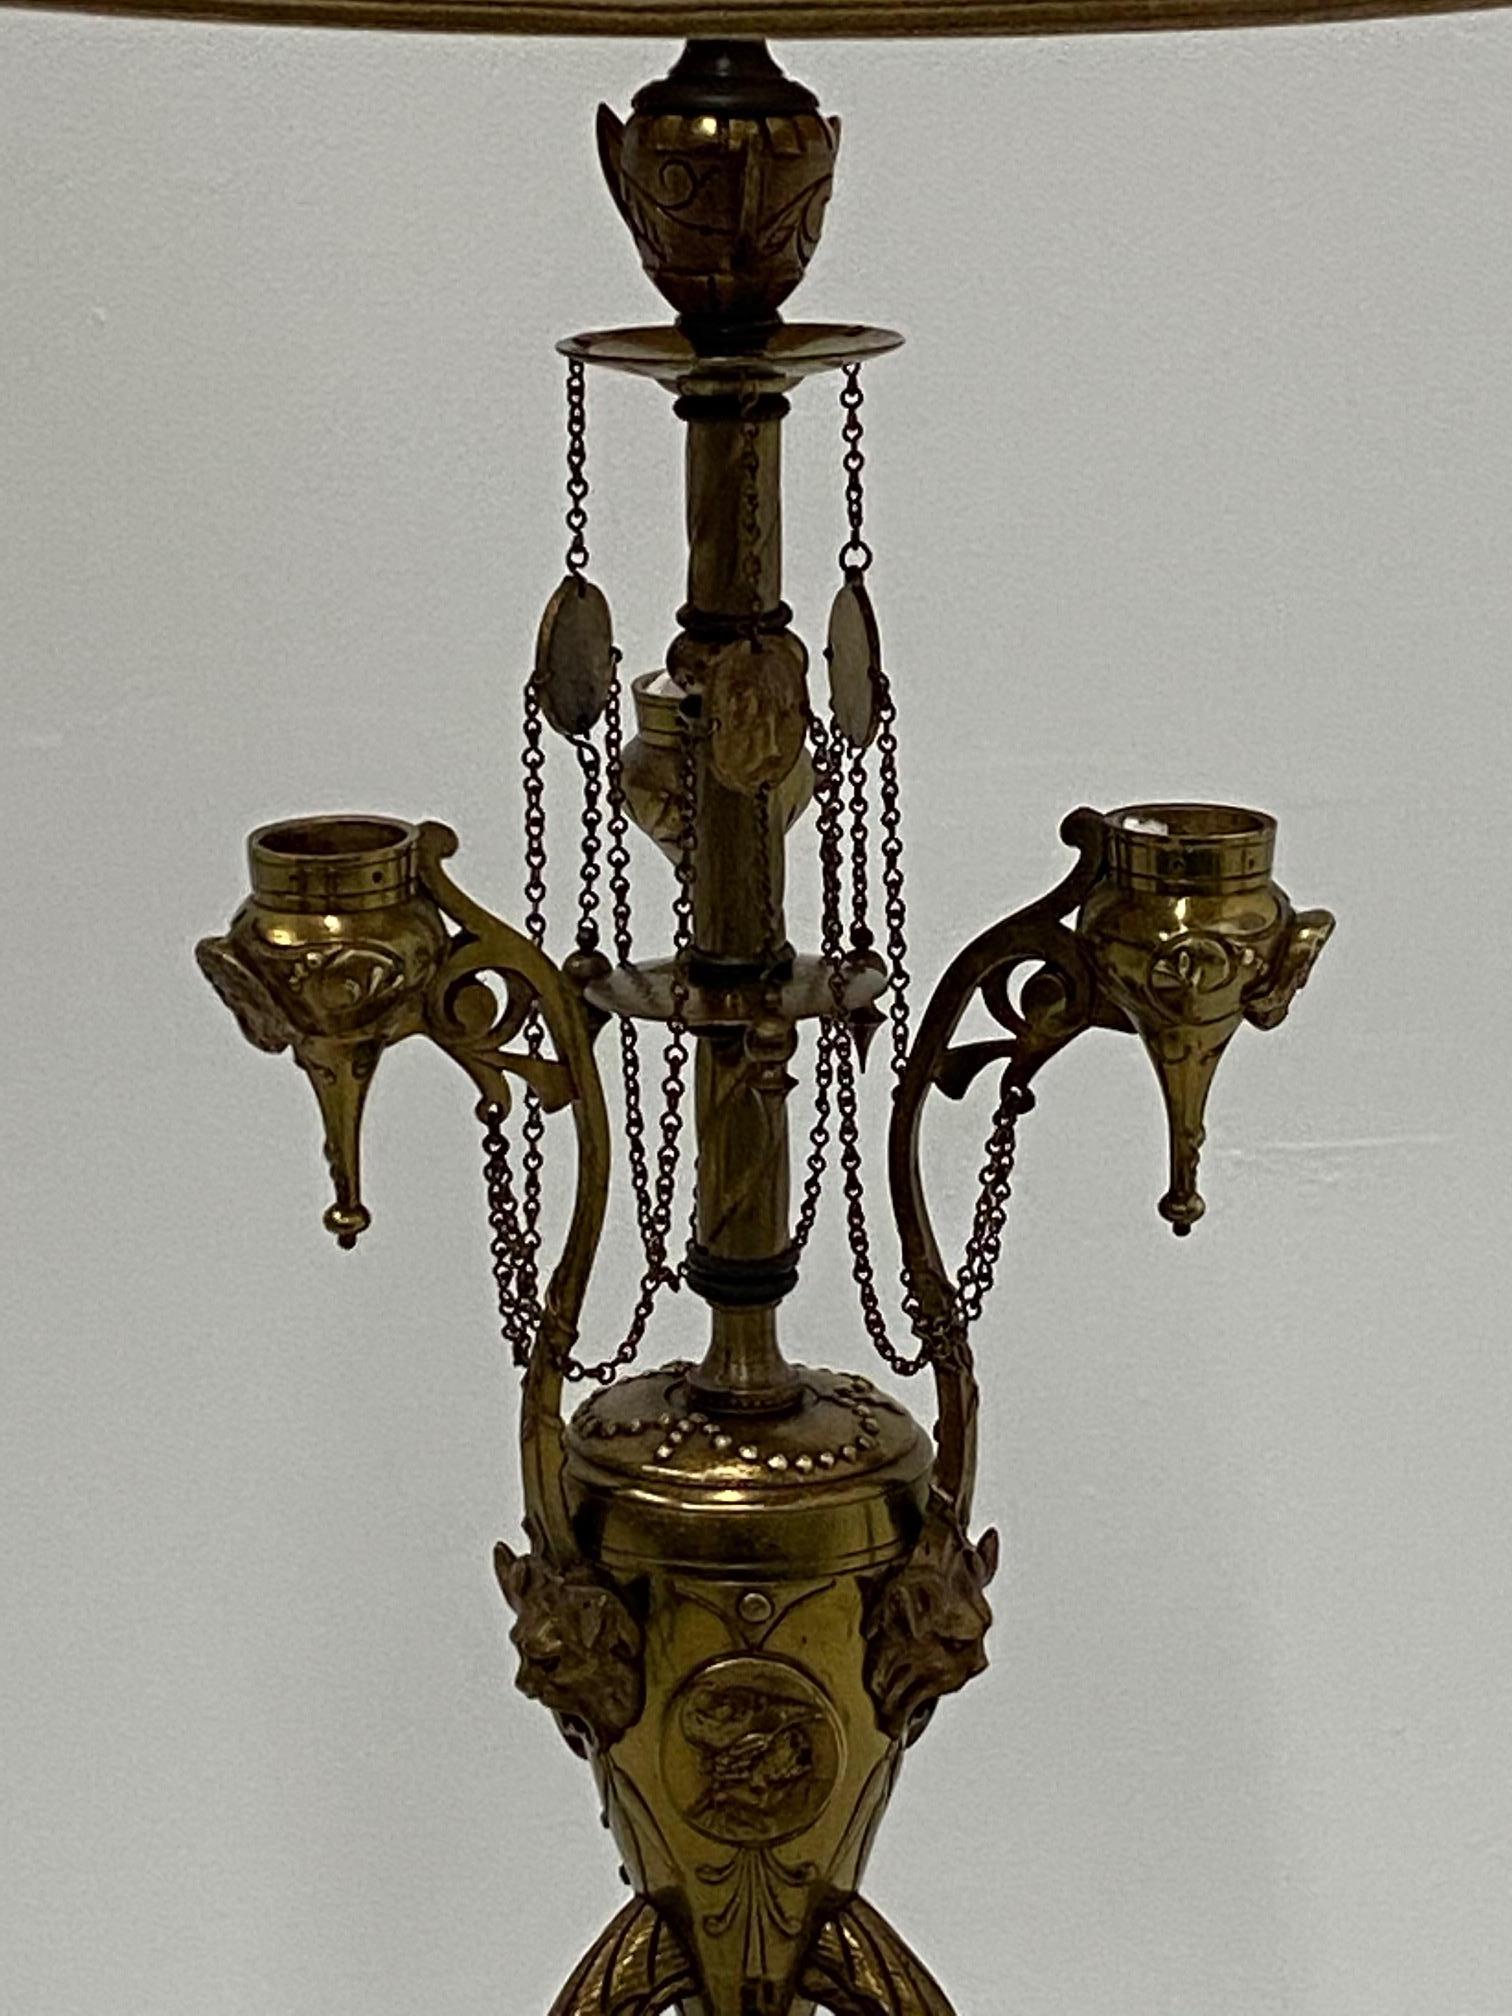 Ornate Antique Continental Neoclassical Brass Candlestick Table Lamp 12